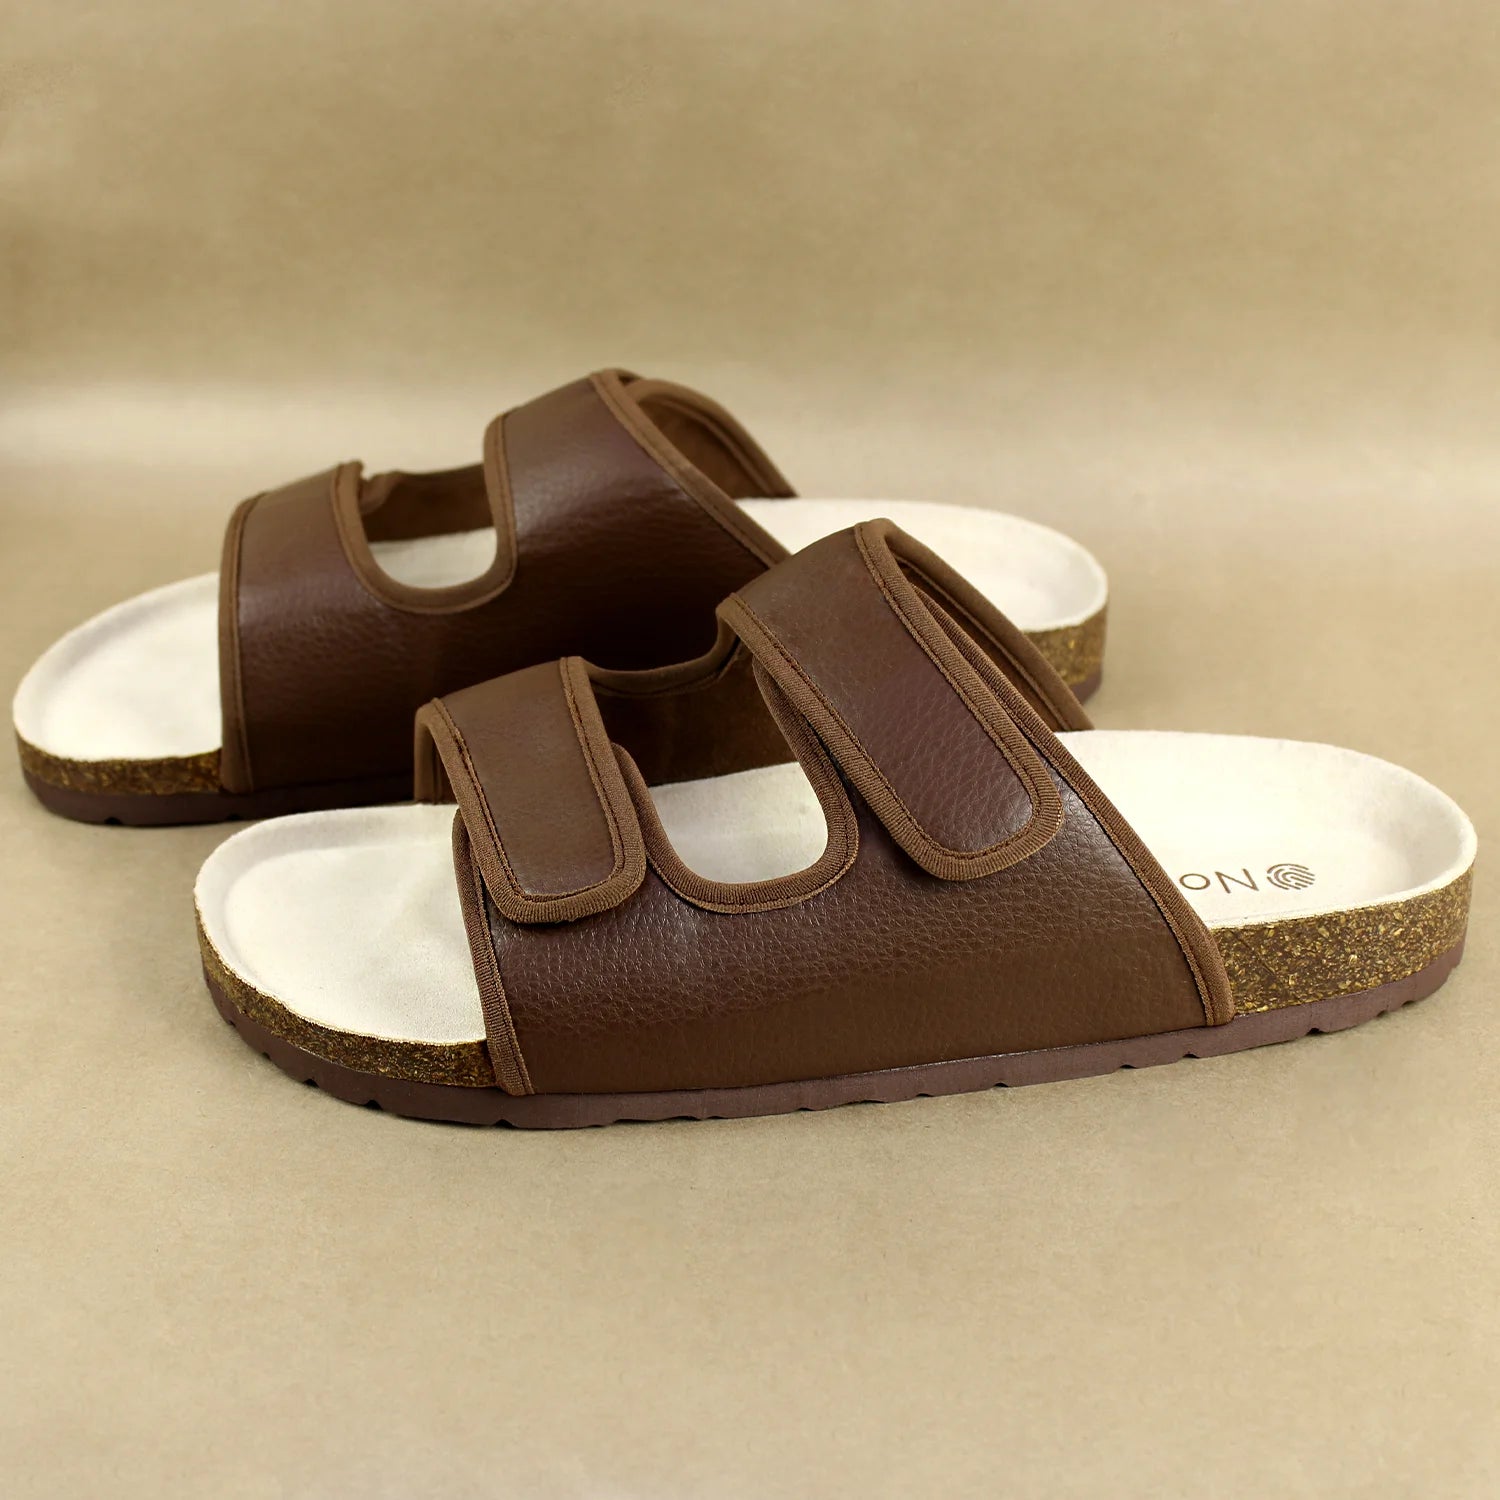 Adjustable Strap Sandals in Cookie Brown: Perfect Party Wear for Men